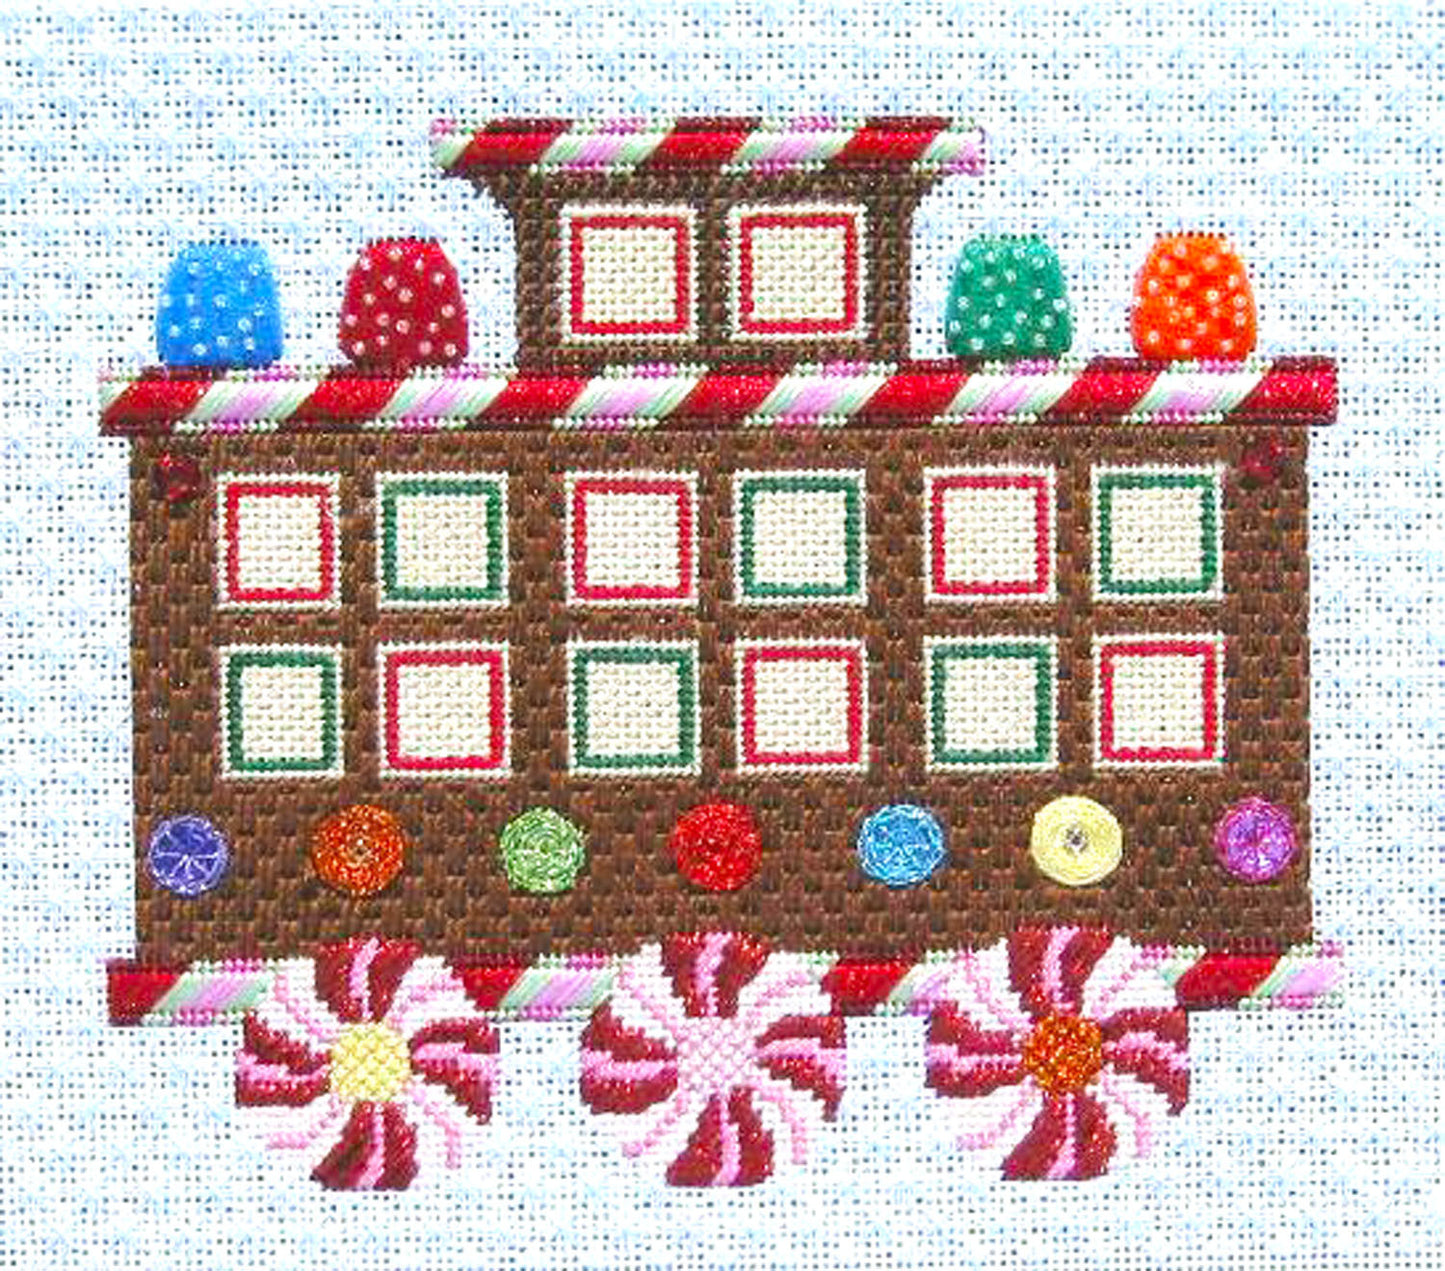 Gingerbread Holiday Train ~ Gingerbread Train Caboose handpainted Needlepoint Canvas by Raymond Crawford